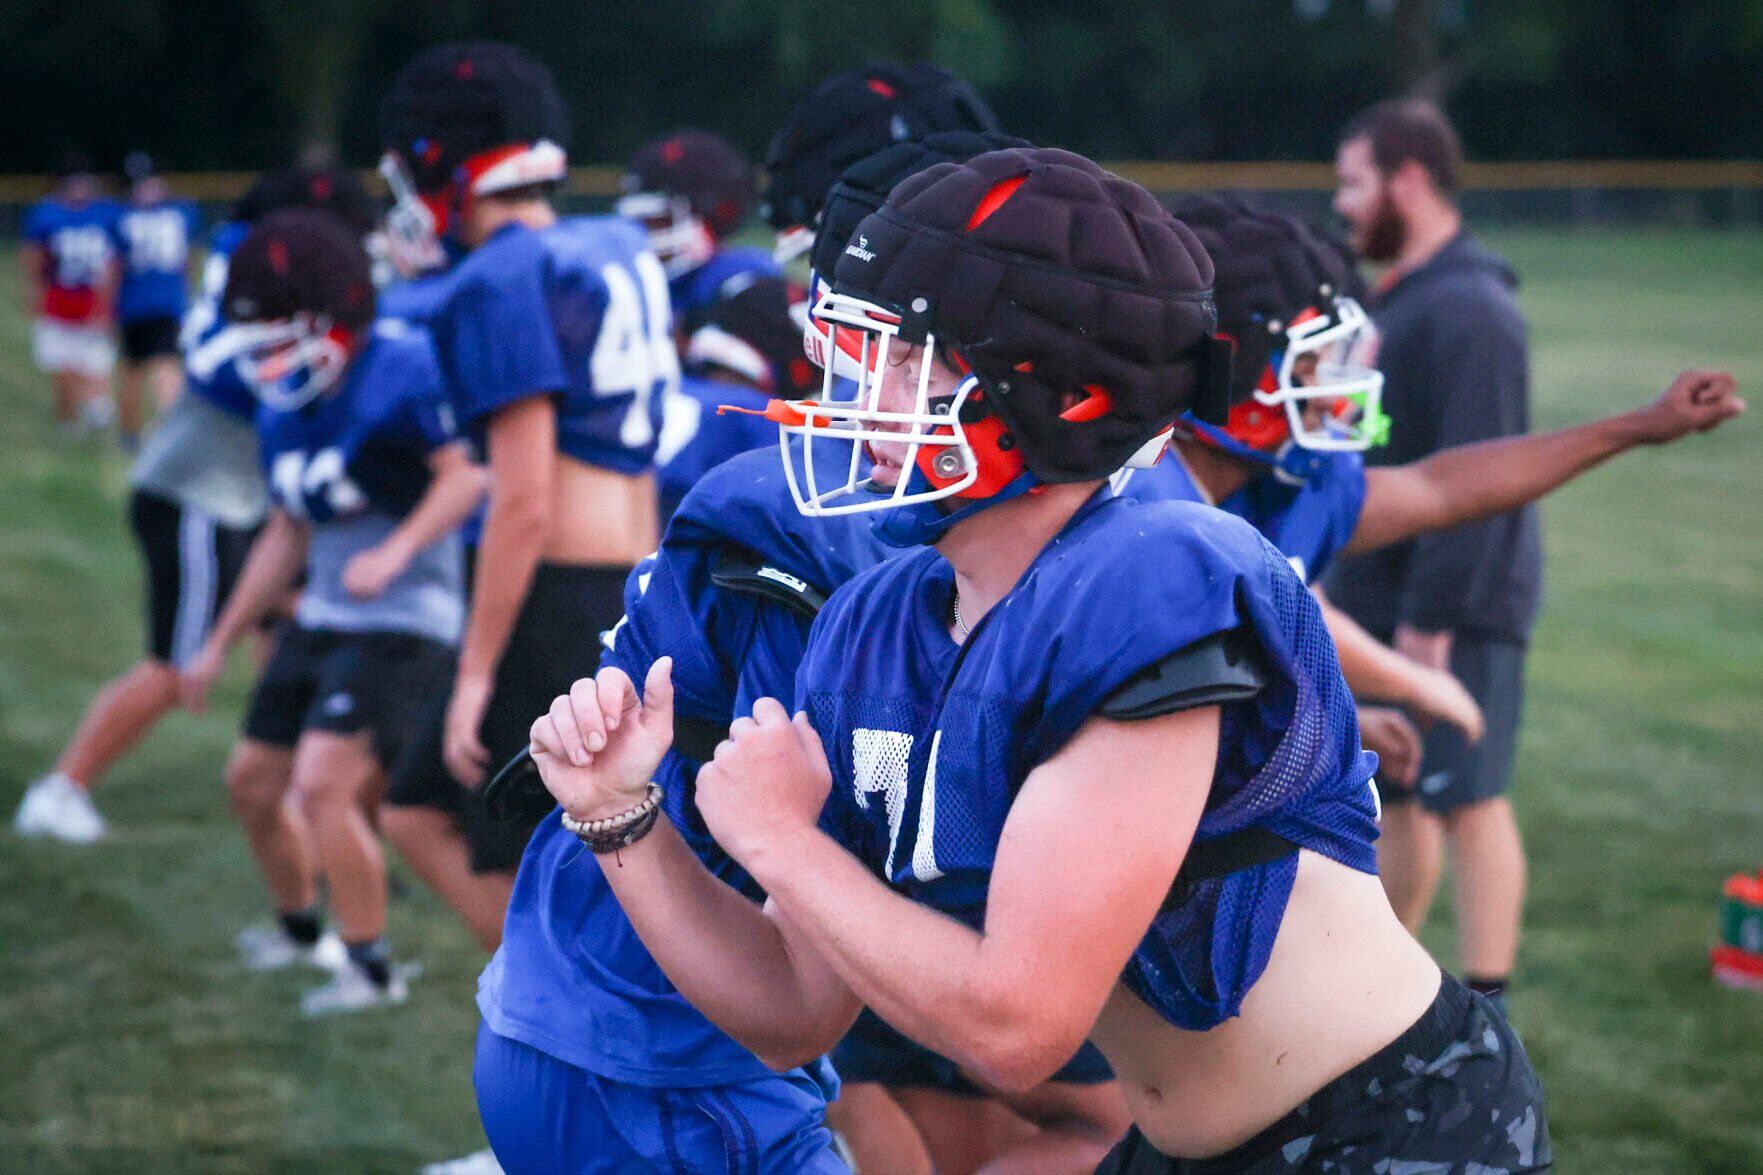 St. Teresa football team takes on new challenges under a new coach and schedule